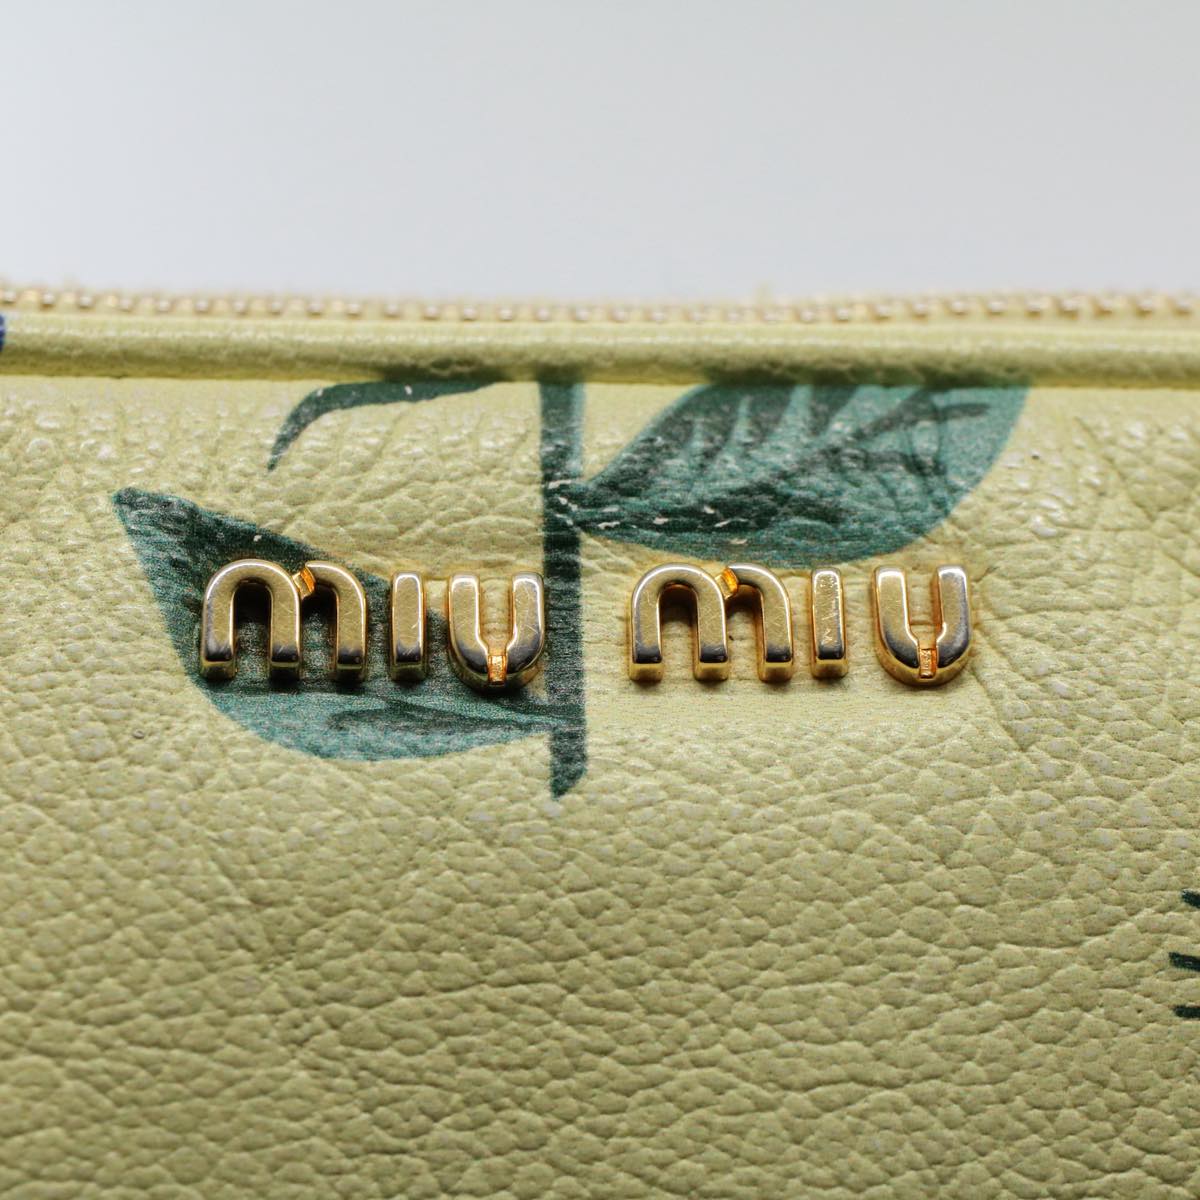 Miu Miu Accessory Pouch Leather Yellow Auth bs9478